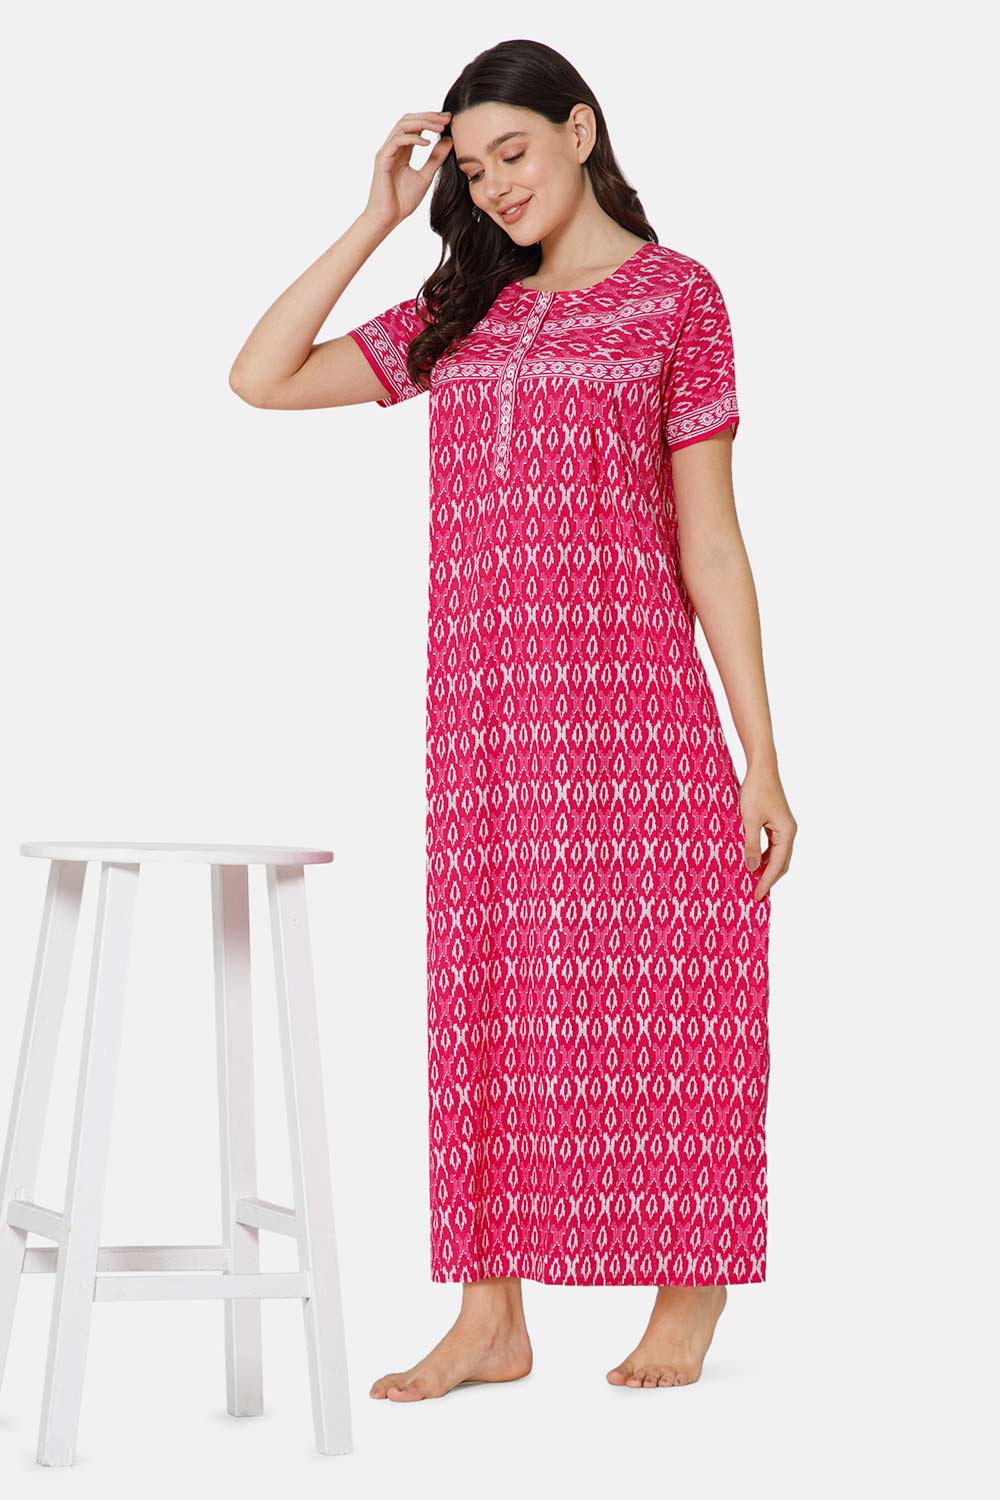 Naidu Hall A-line Front Open Women's Nighty Full Length Half Sleeve  - Pink - R131